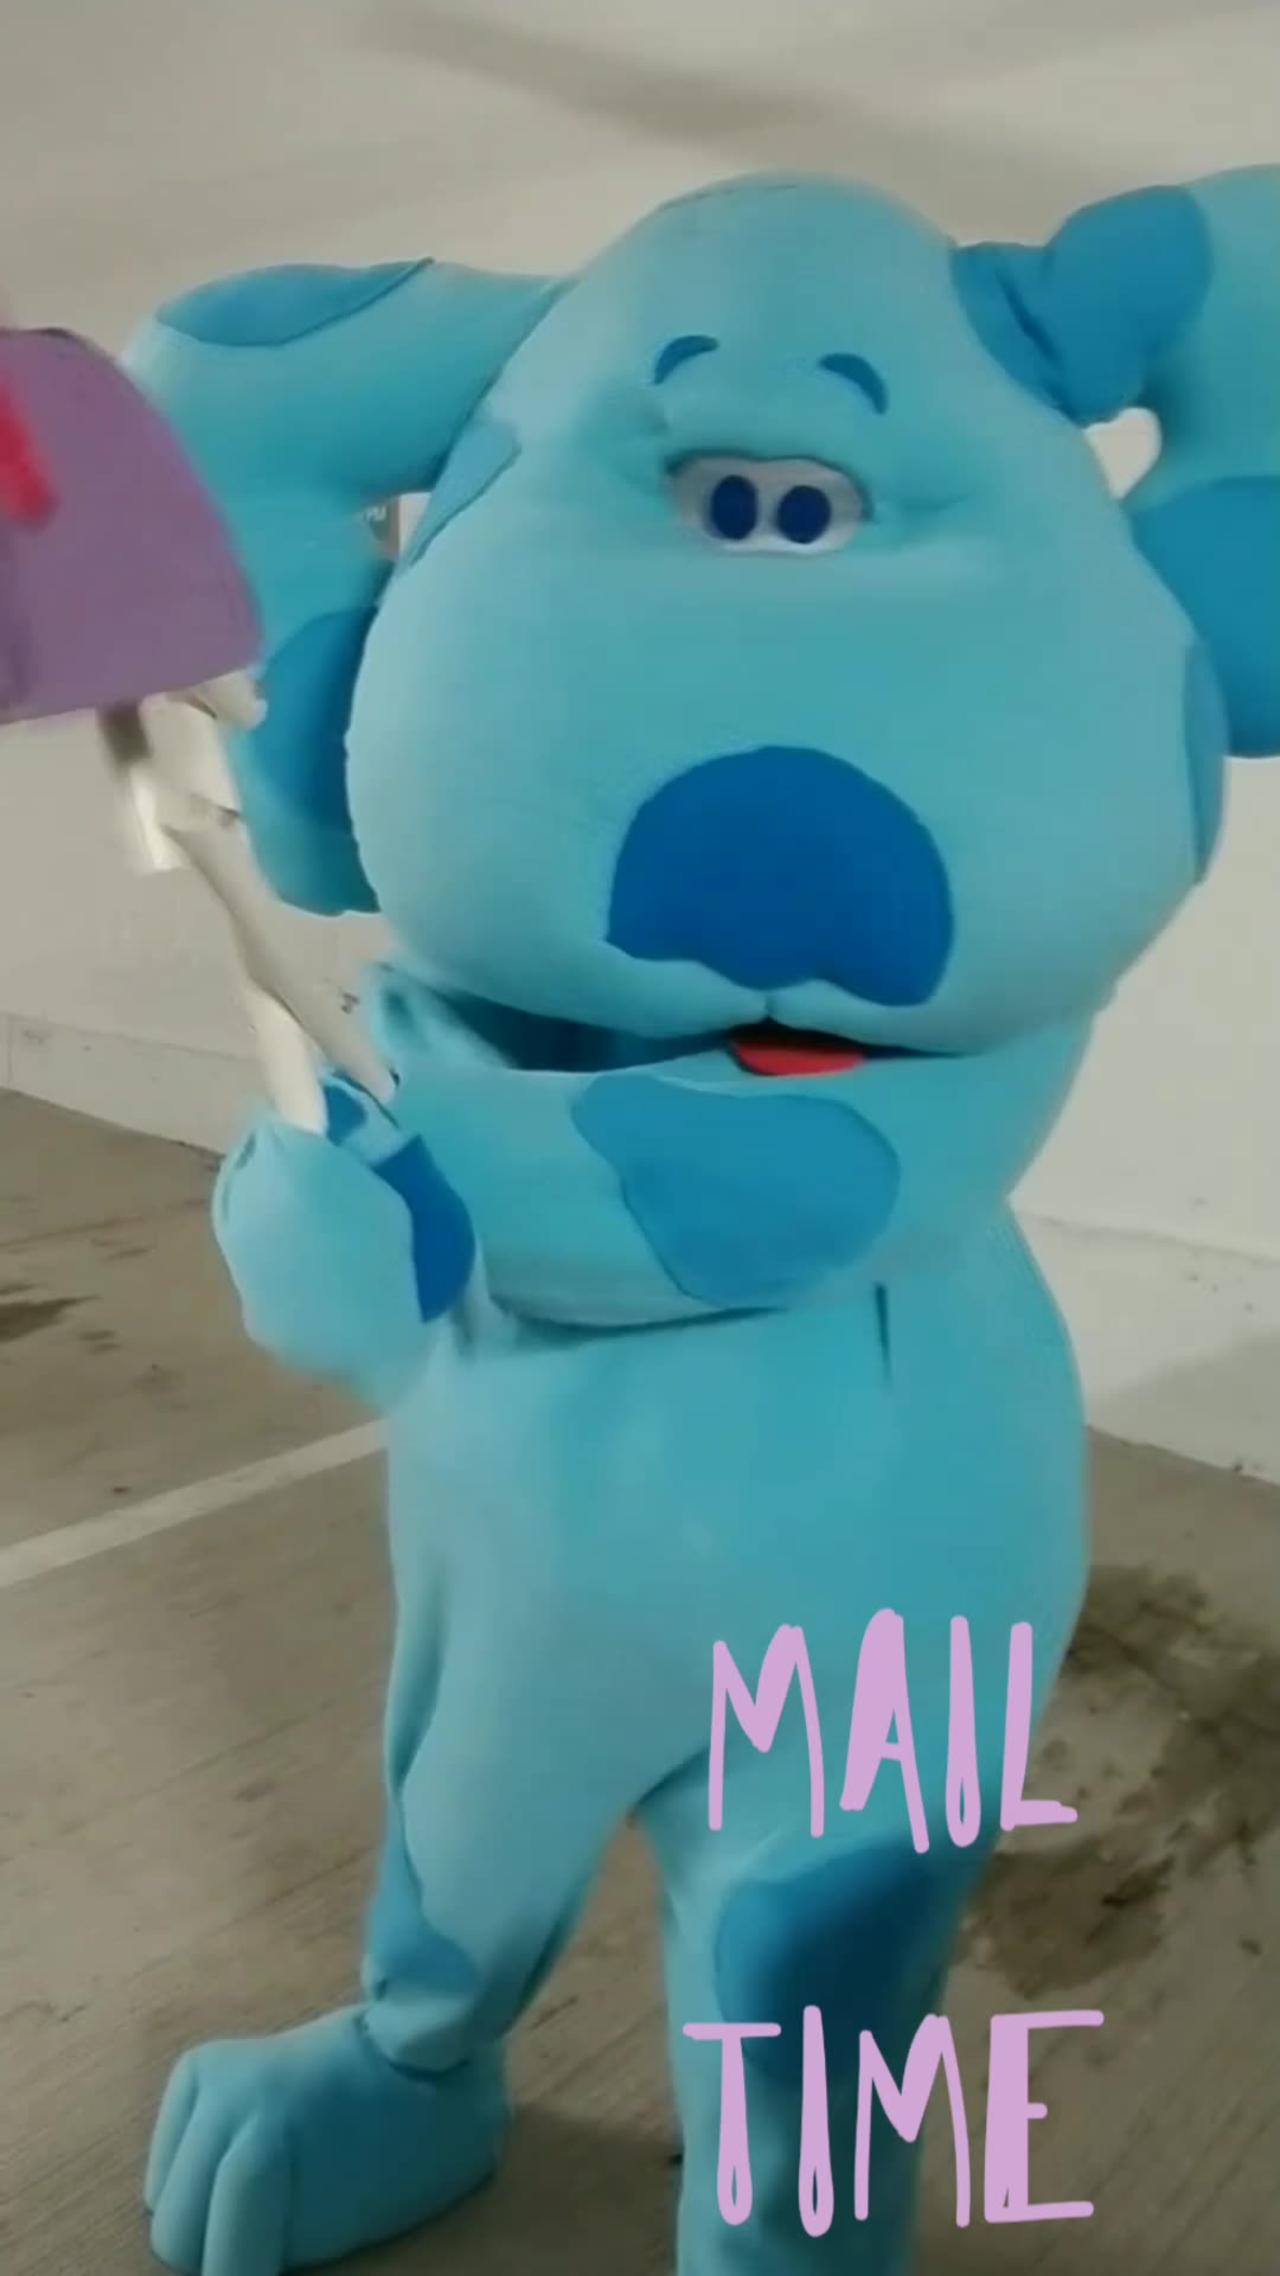 See this Blue dog show the mailbox in the parking garage